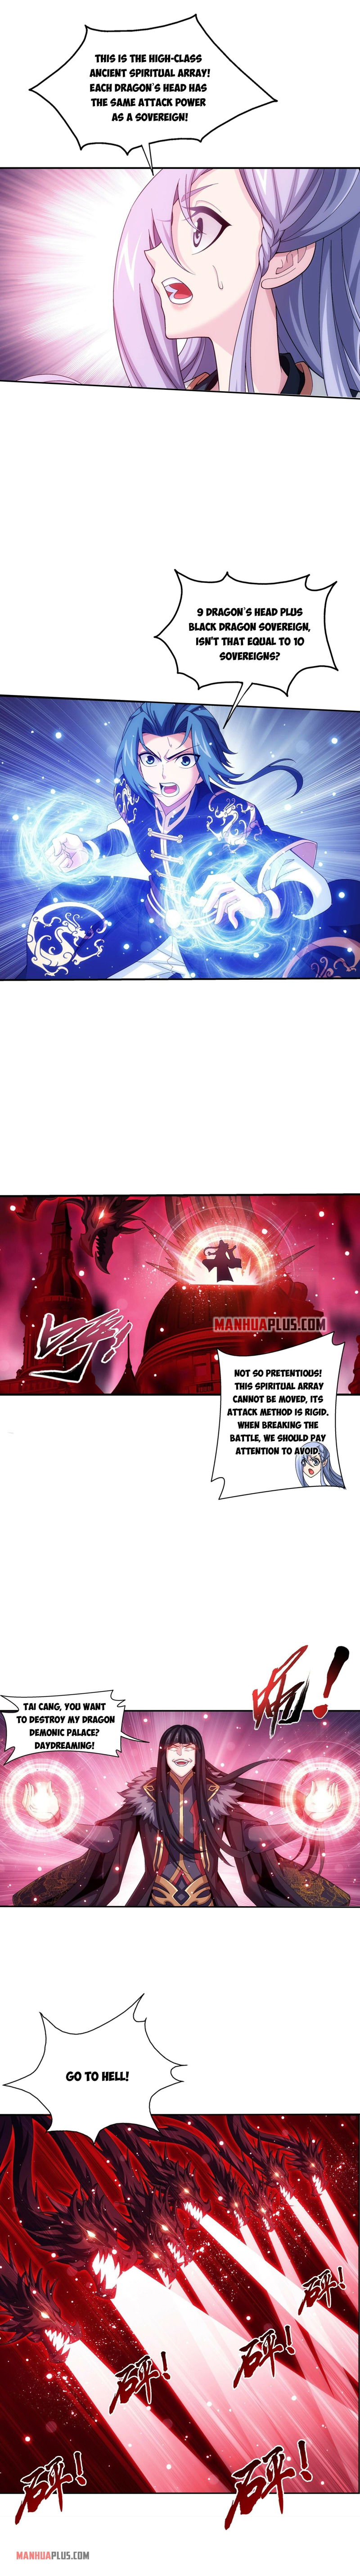 The Great Ruler Chapter 270 page 6